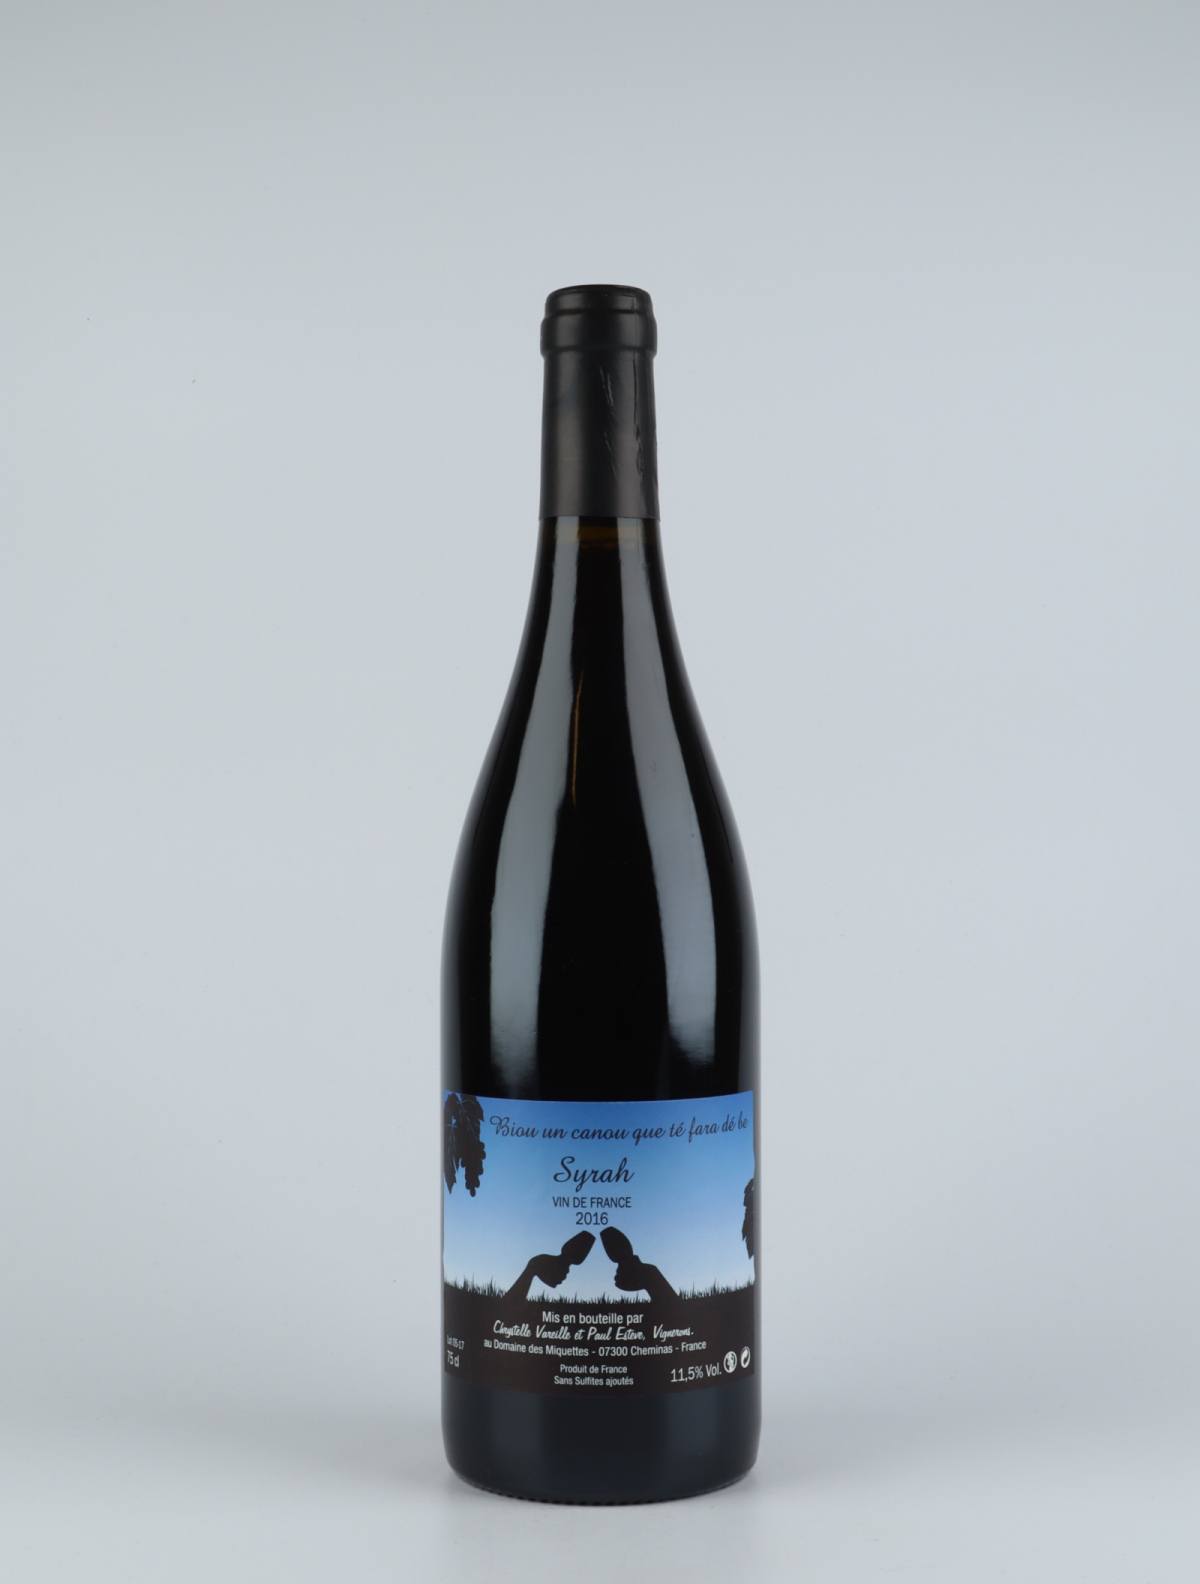 A bottle 2016 Syrah Red wine from Domaine des Miquettes, Rhône in France